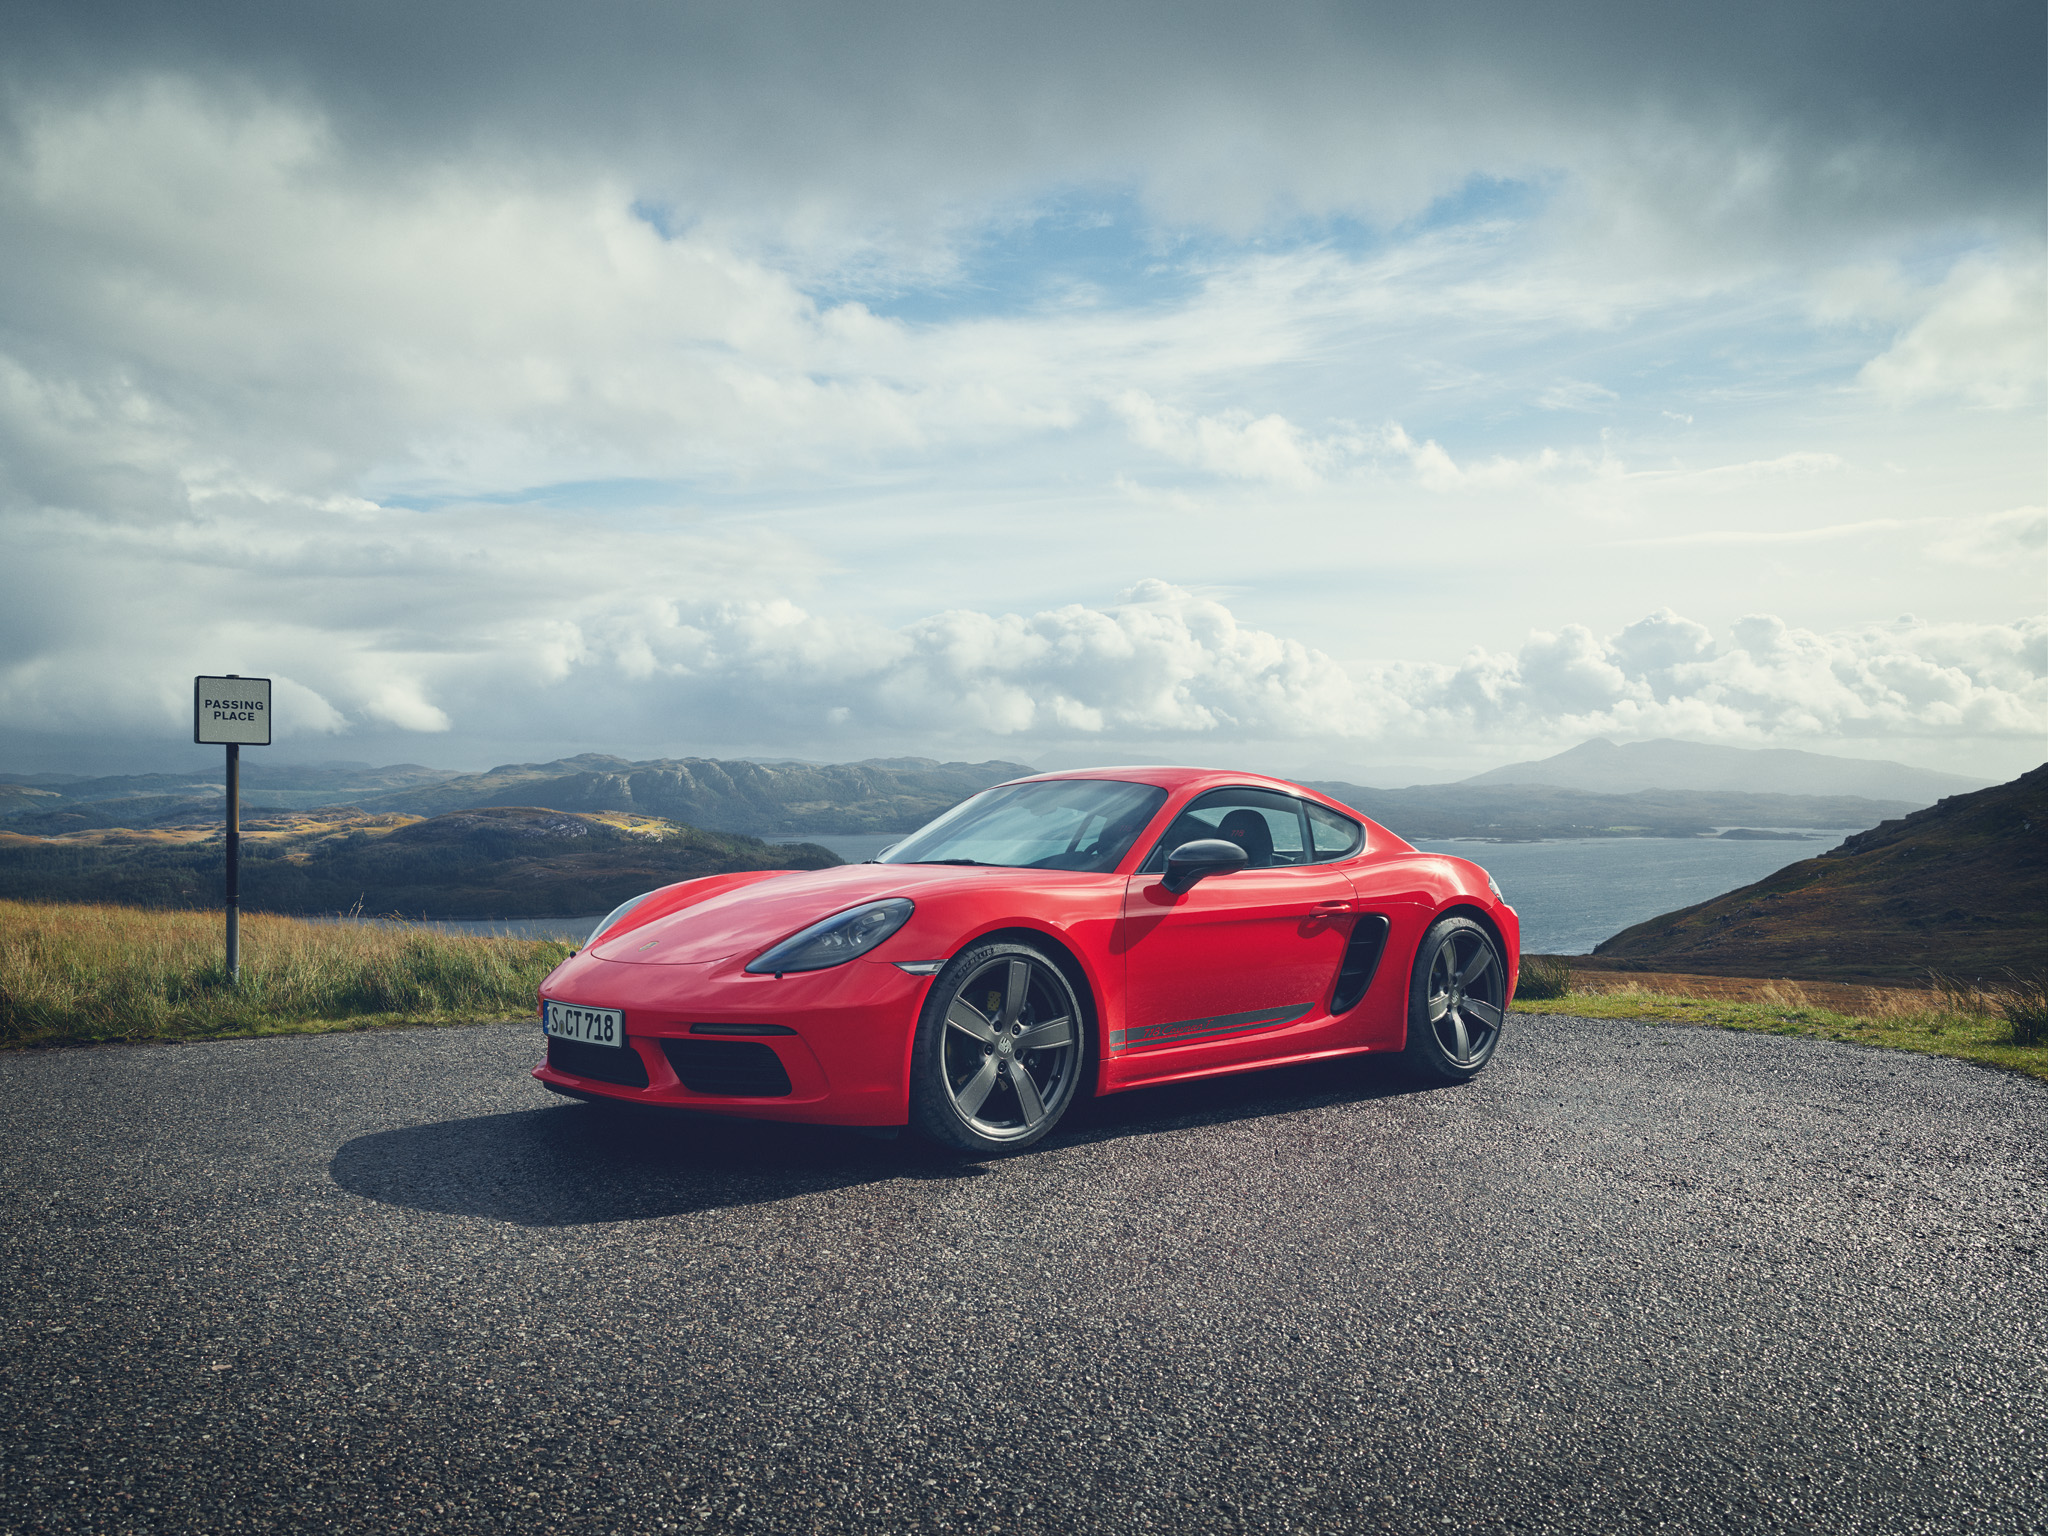 Cayman in Guards Red parked with hills and water behind